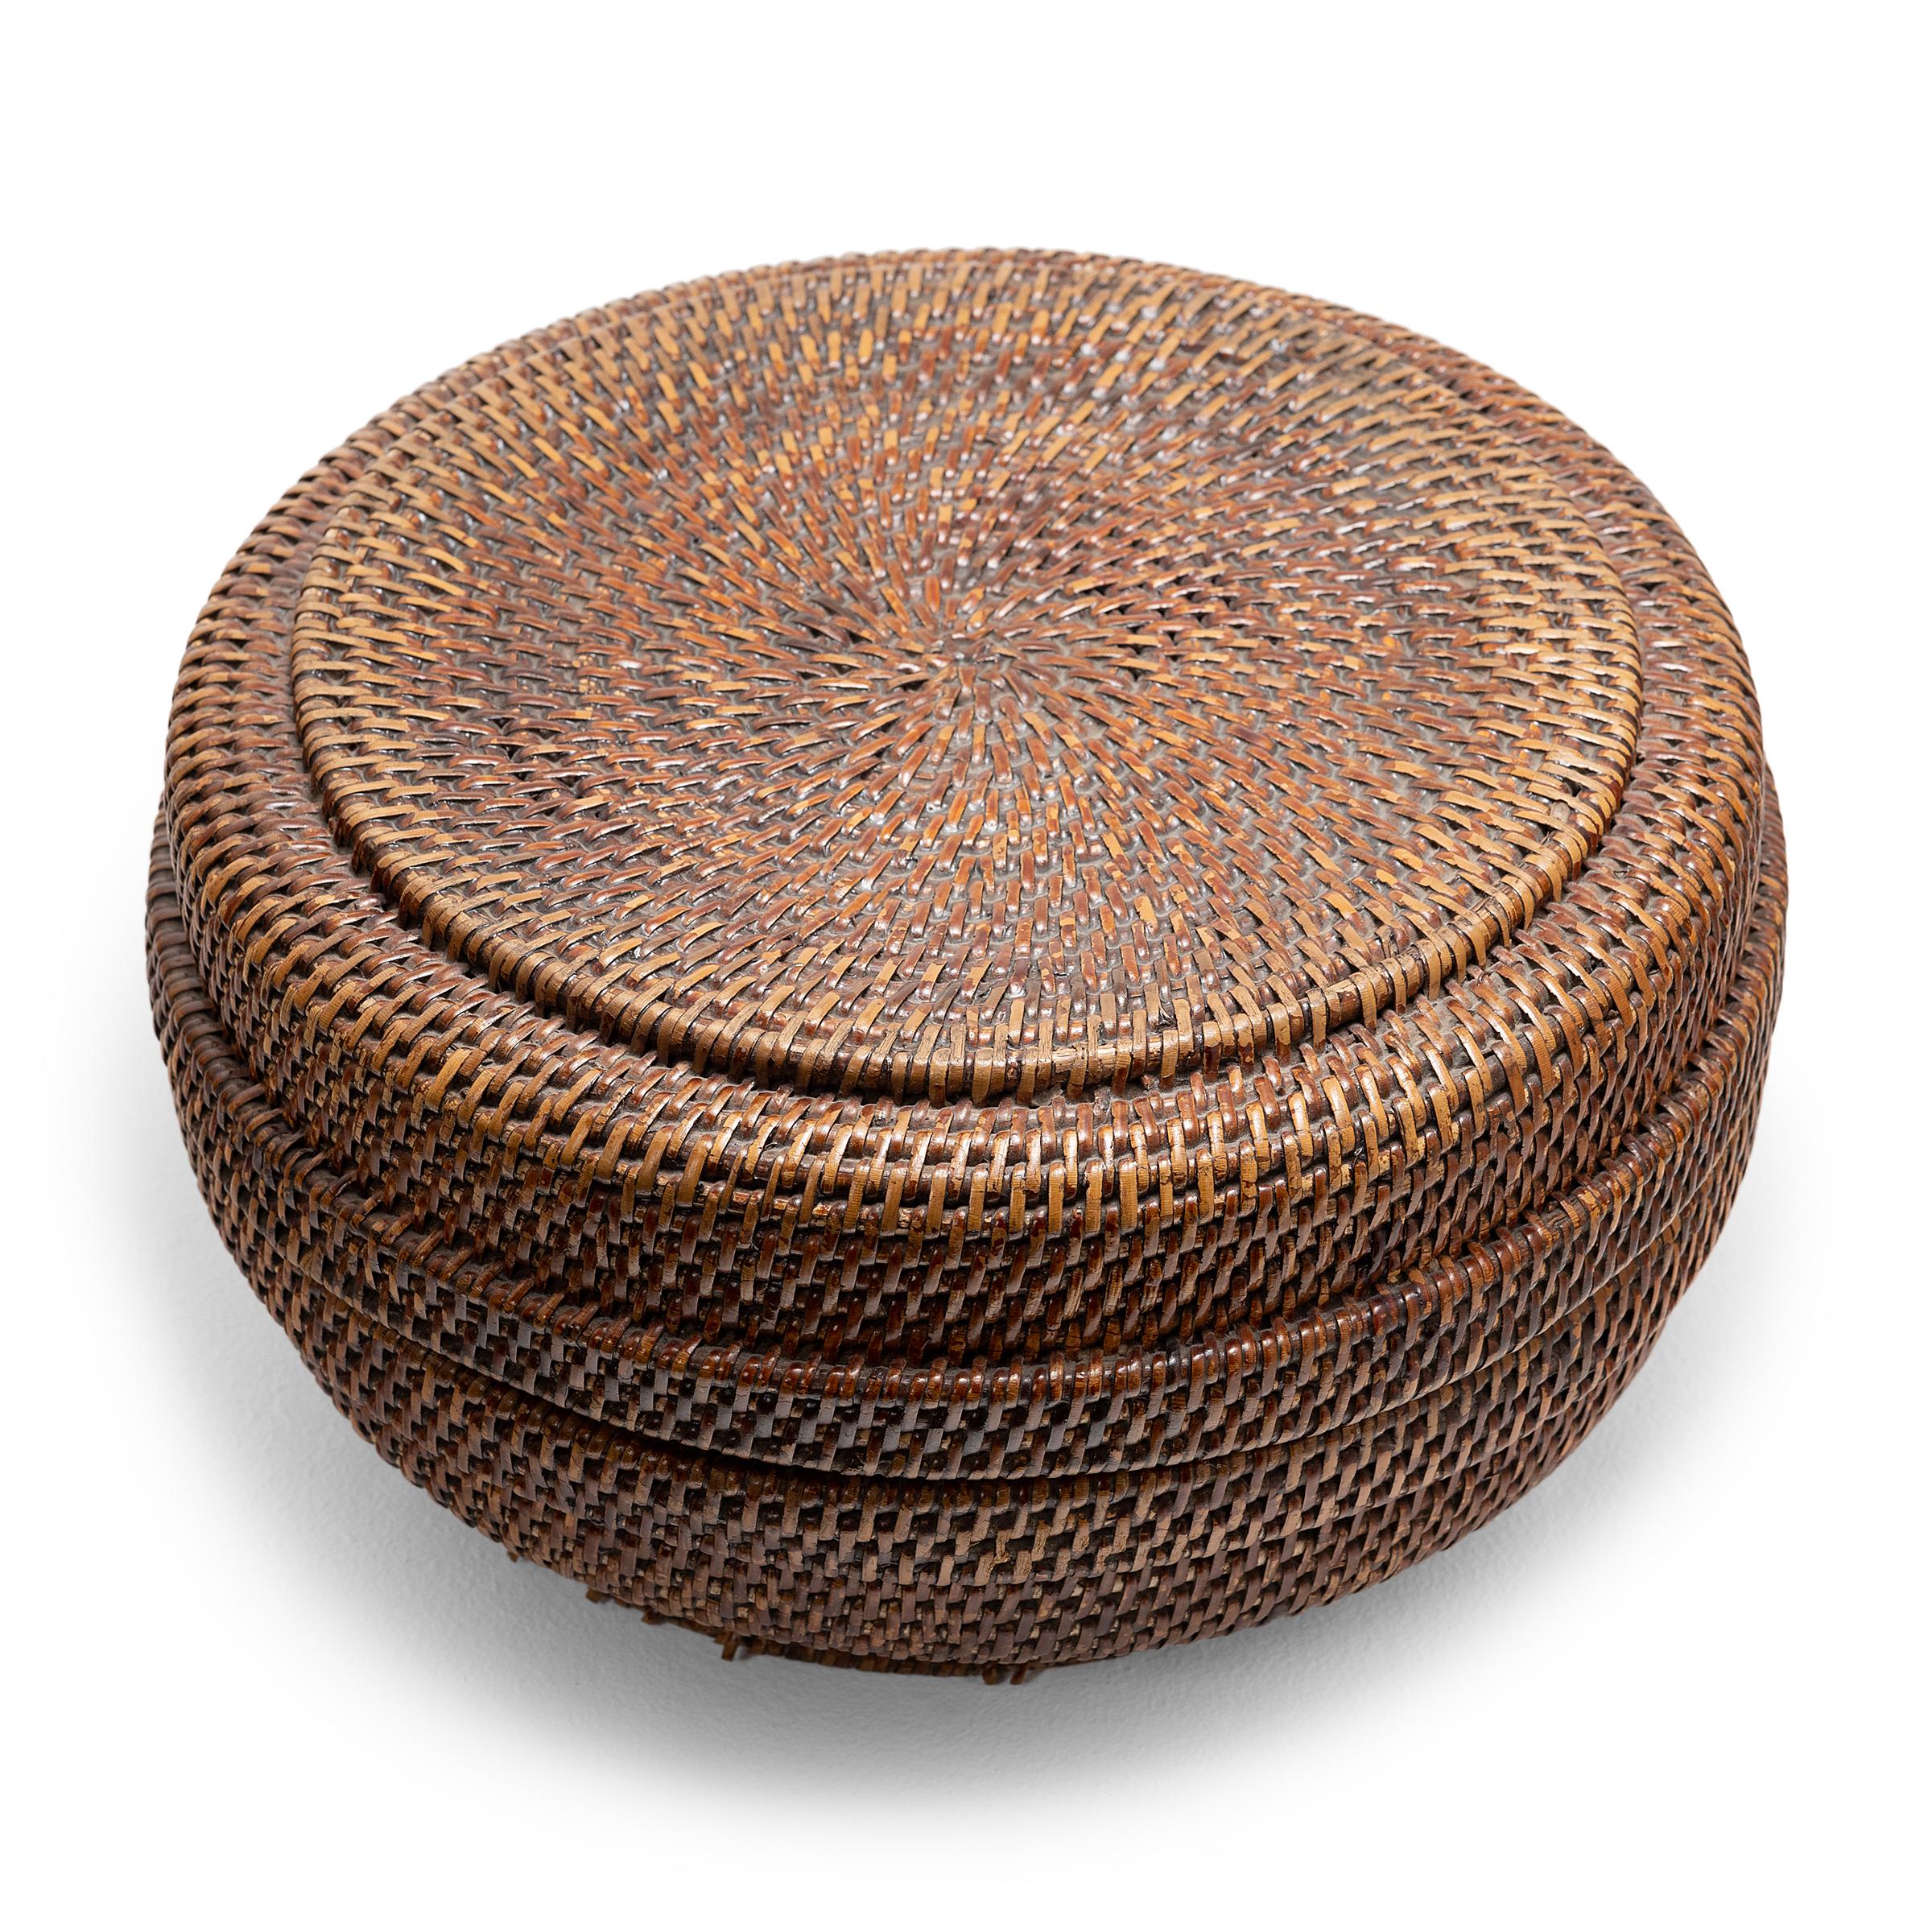 Qing Round Woven Chinese Box, c. 1850 For Sale